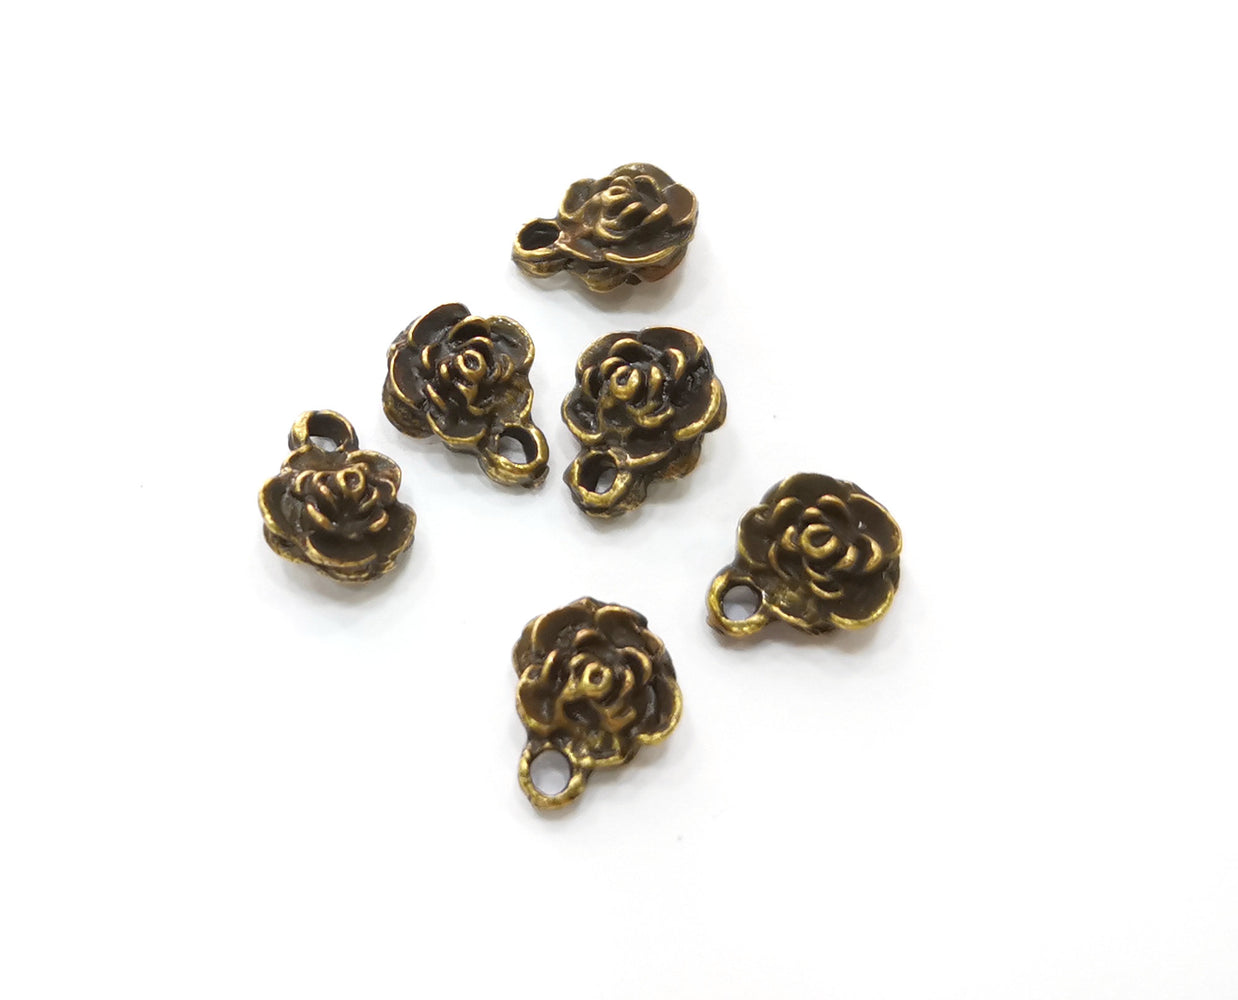 10 Rose Flower Charms Antique Bronze Plated Charms Double sided (Both Side Same) (11x9mm)  G18800